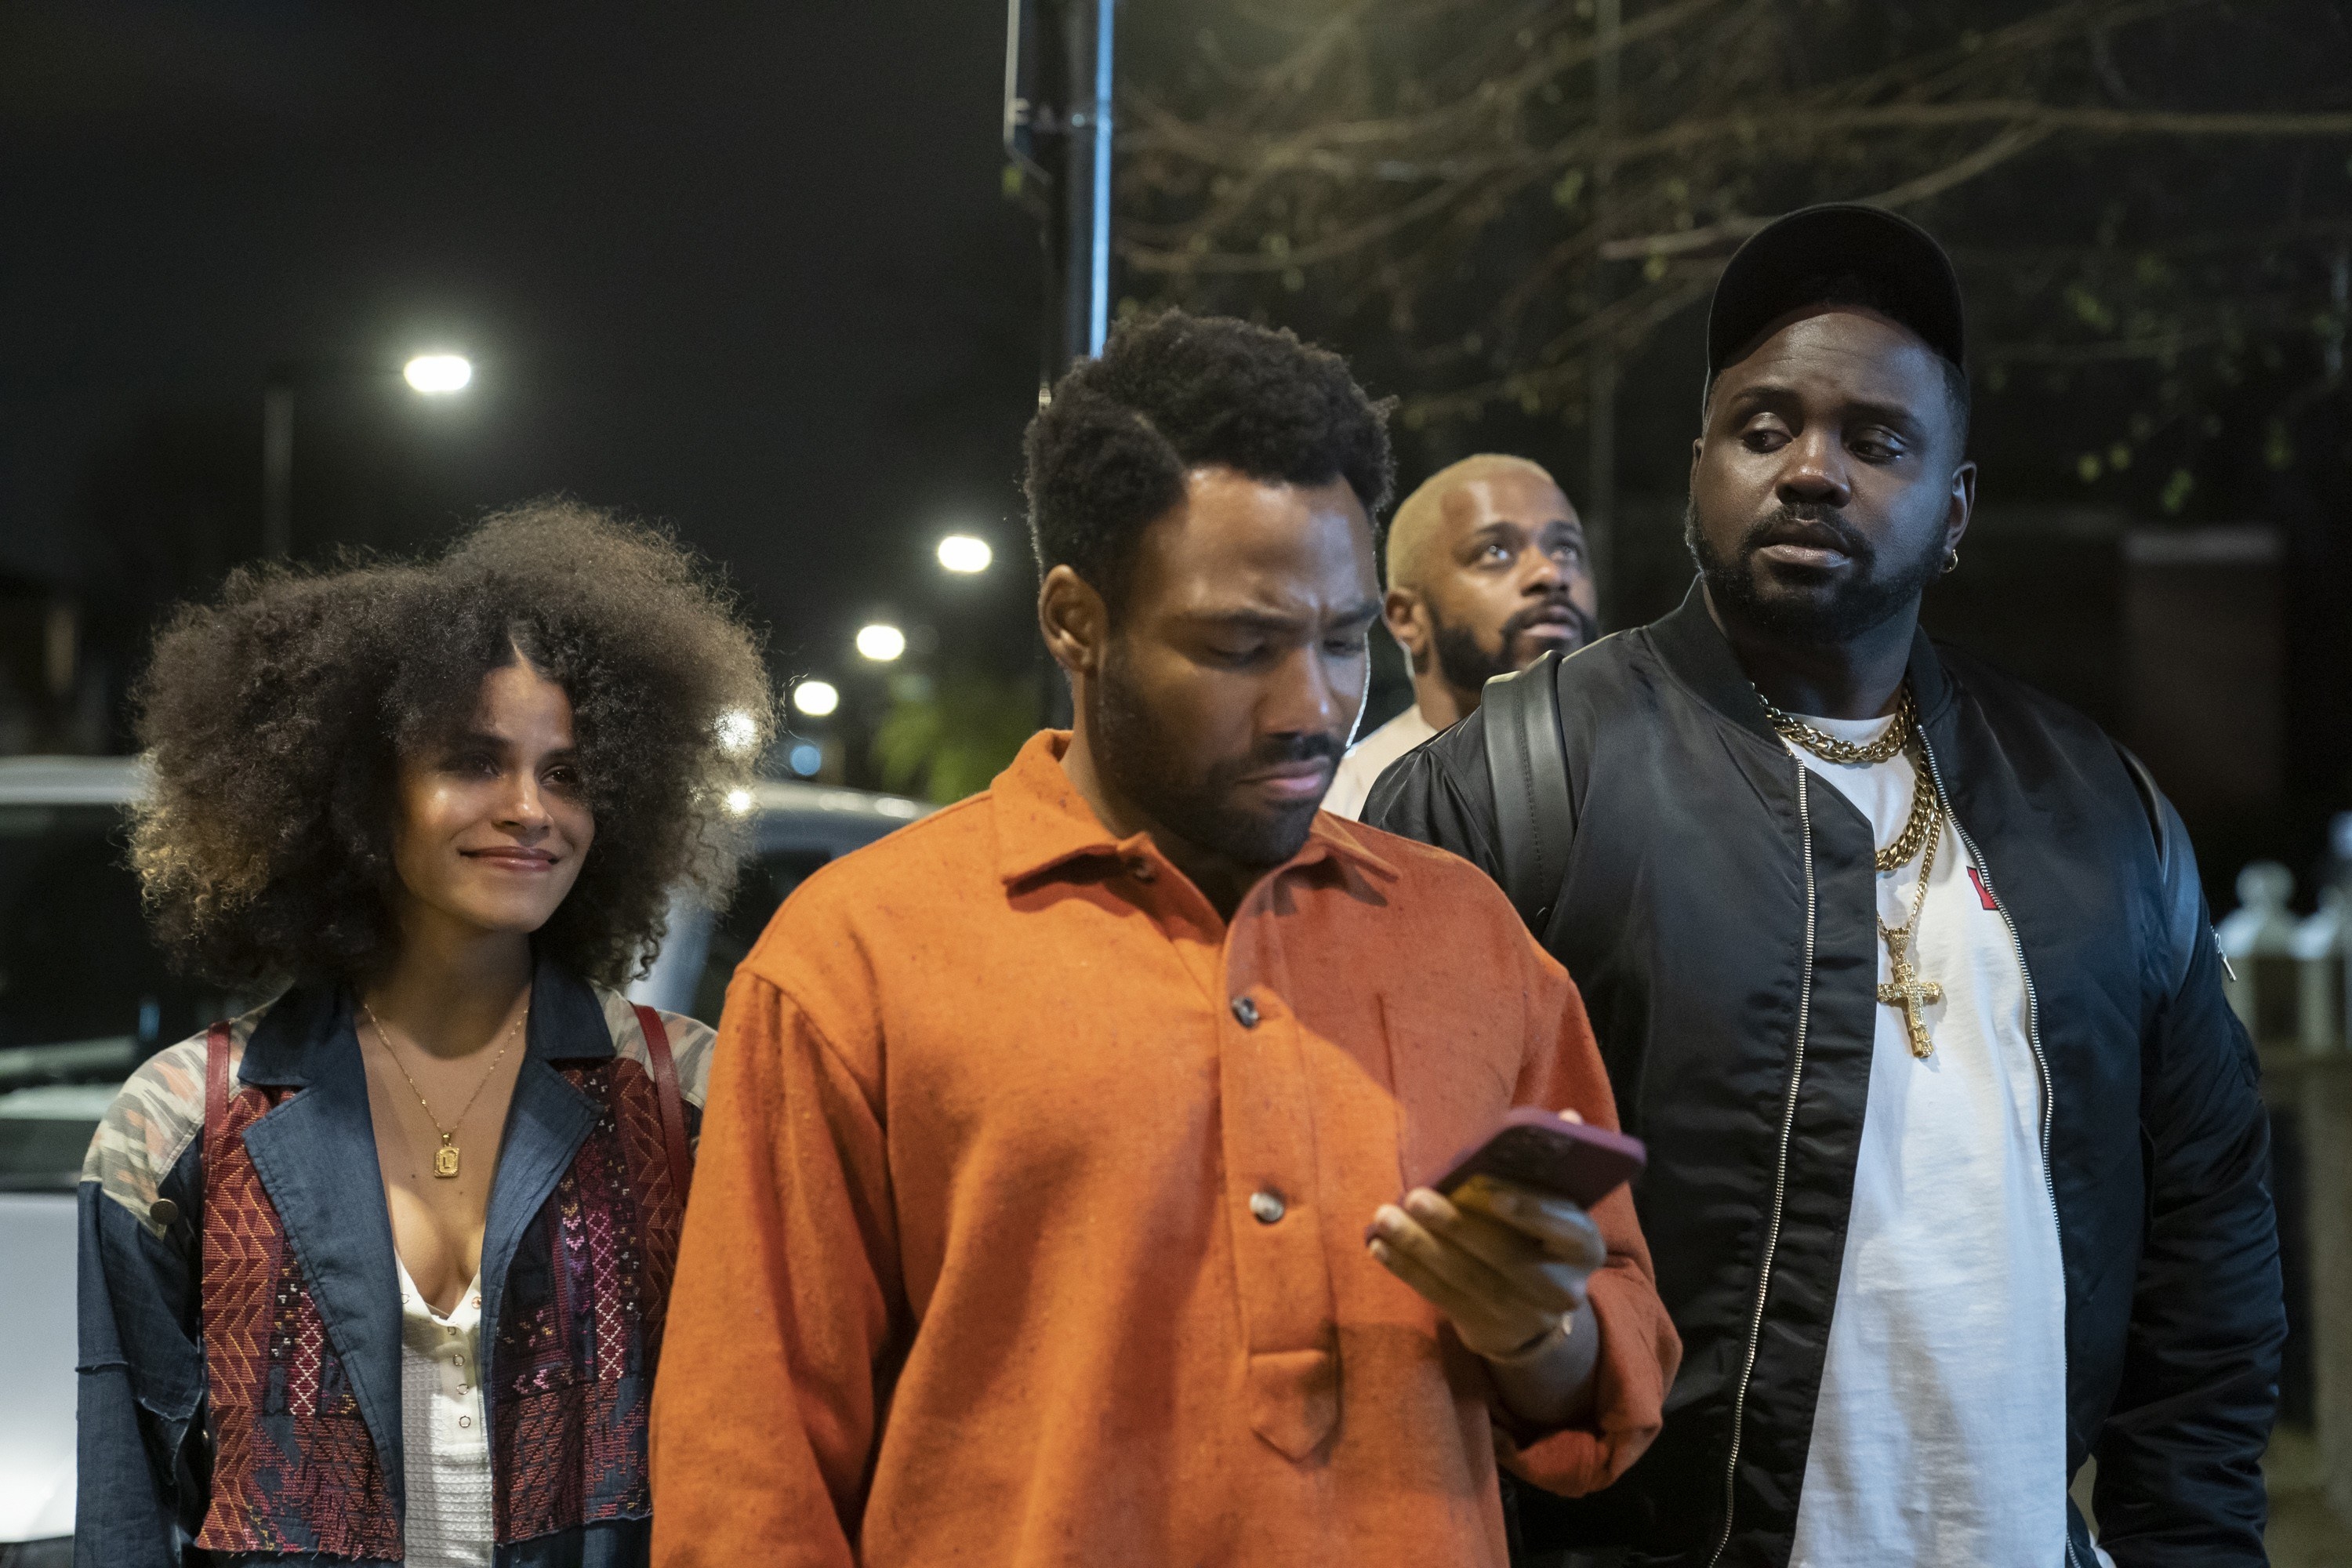 Brian walking with his costars in a scene from the show Atlanta